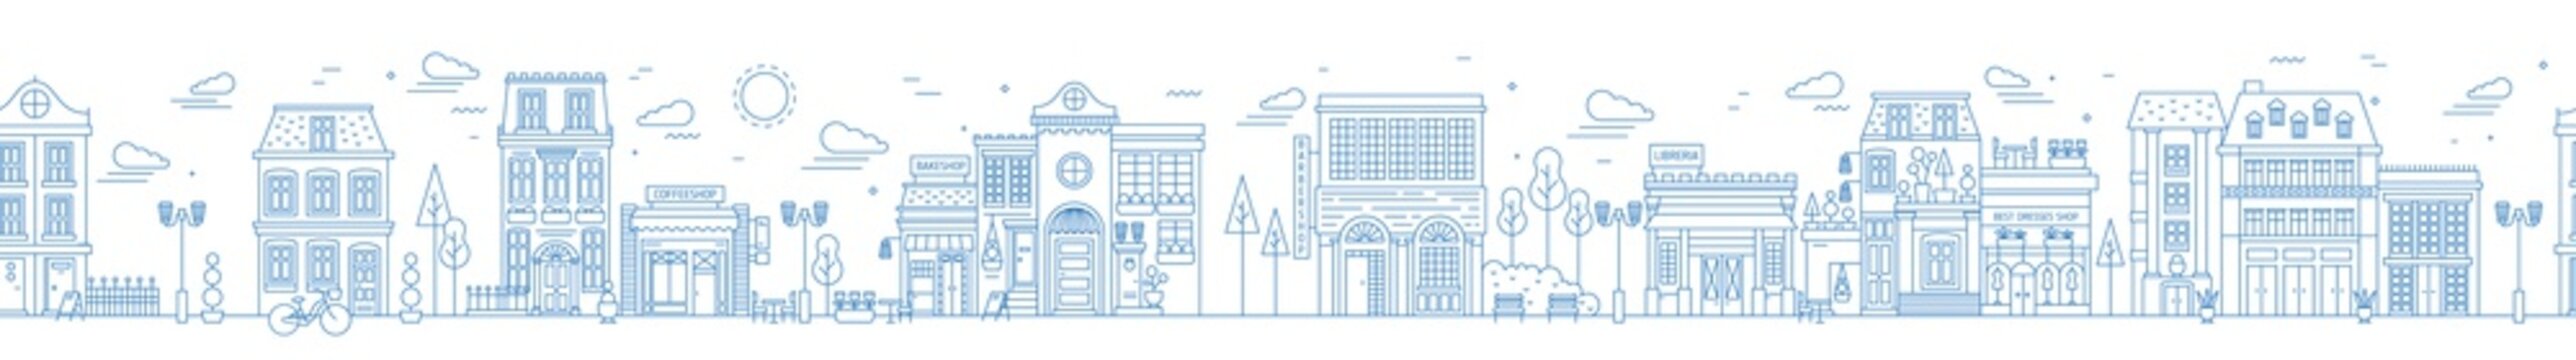 Monochrome seamless urban landscape with city street or district. Cityscape with residential houses and shops drawn with contour lines on white background. Vector illustration in lineart style.